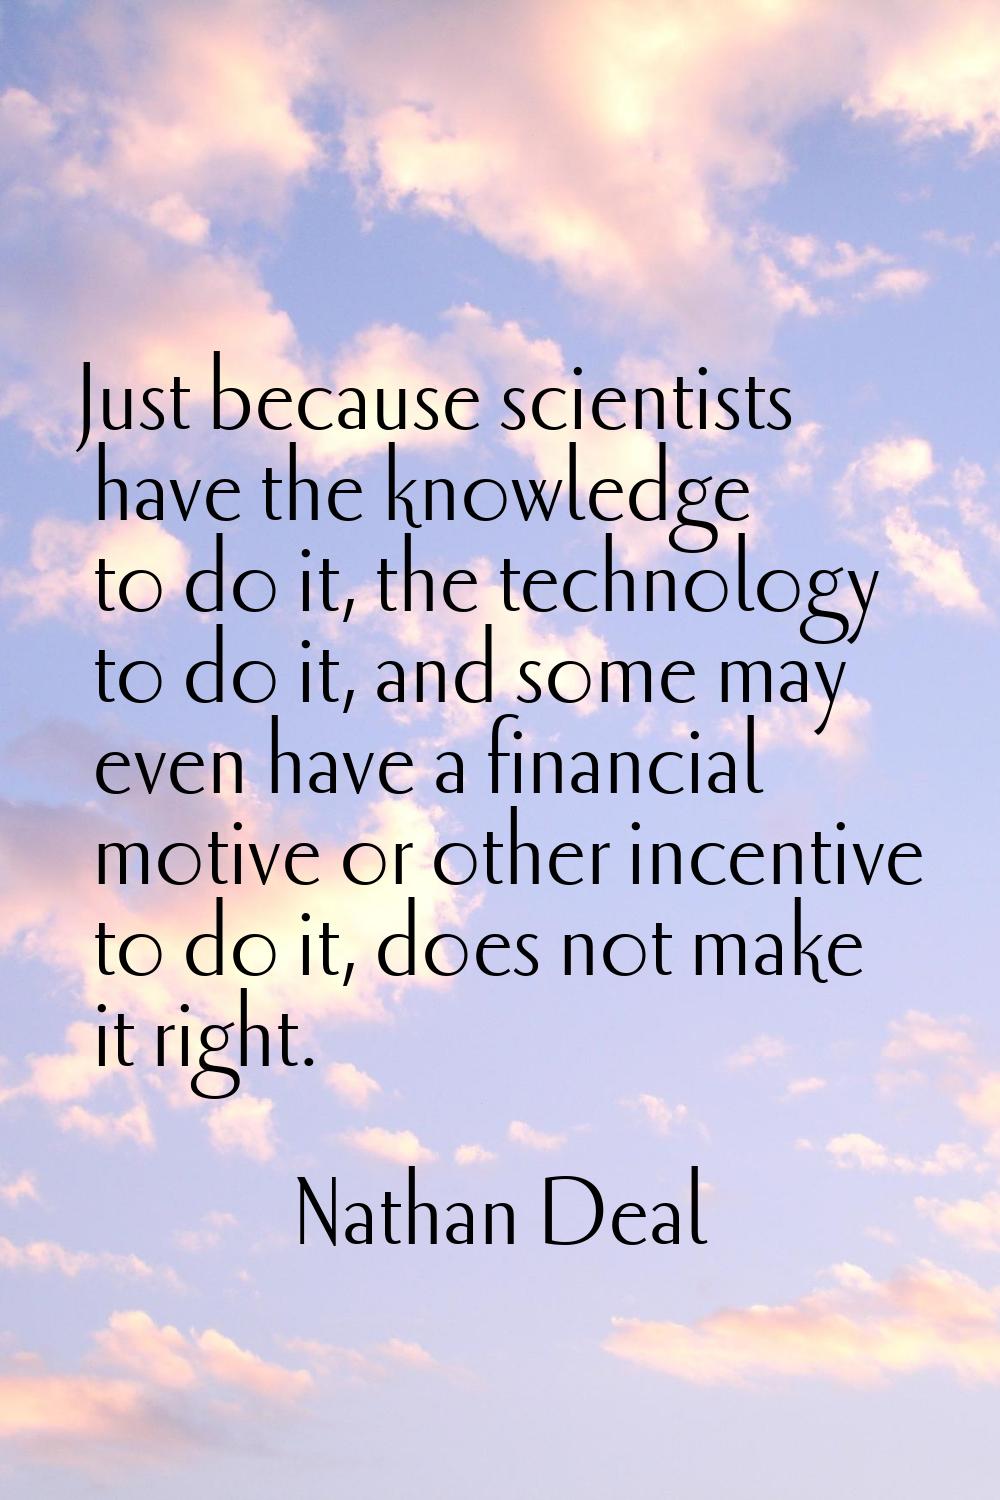 Just because scientists have the knowledge to do it, the technology to do it, and some may even hav